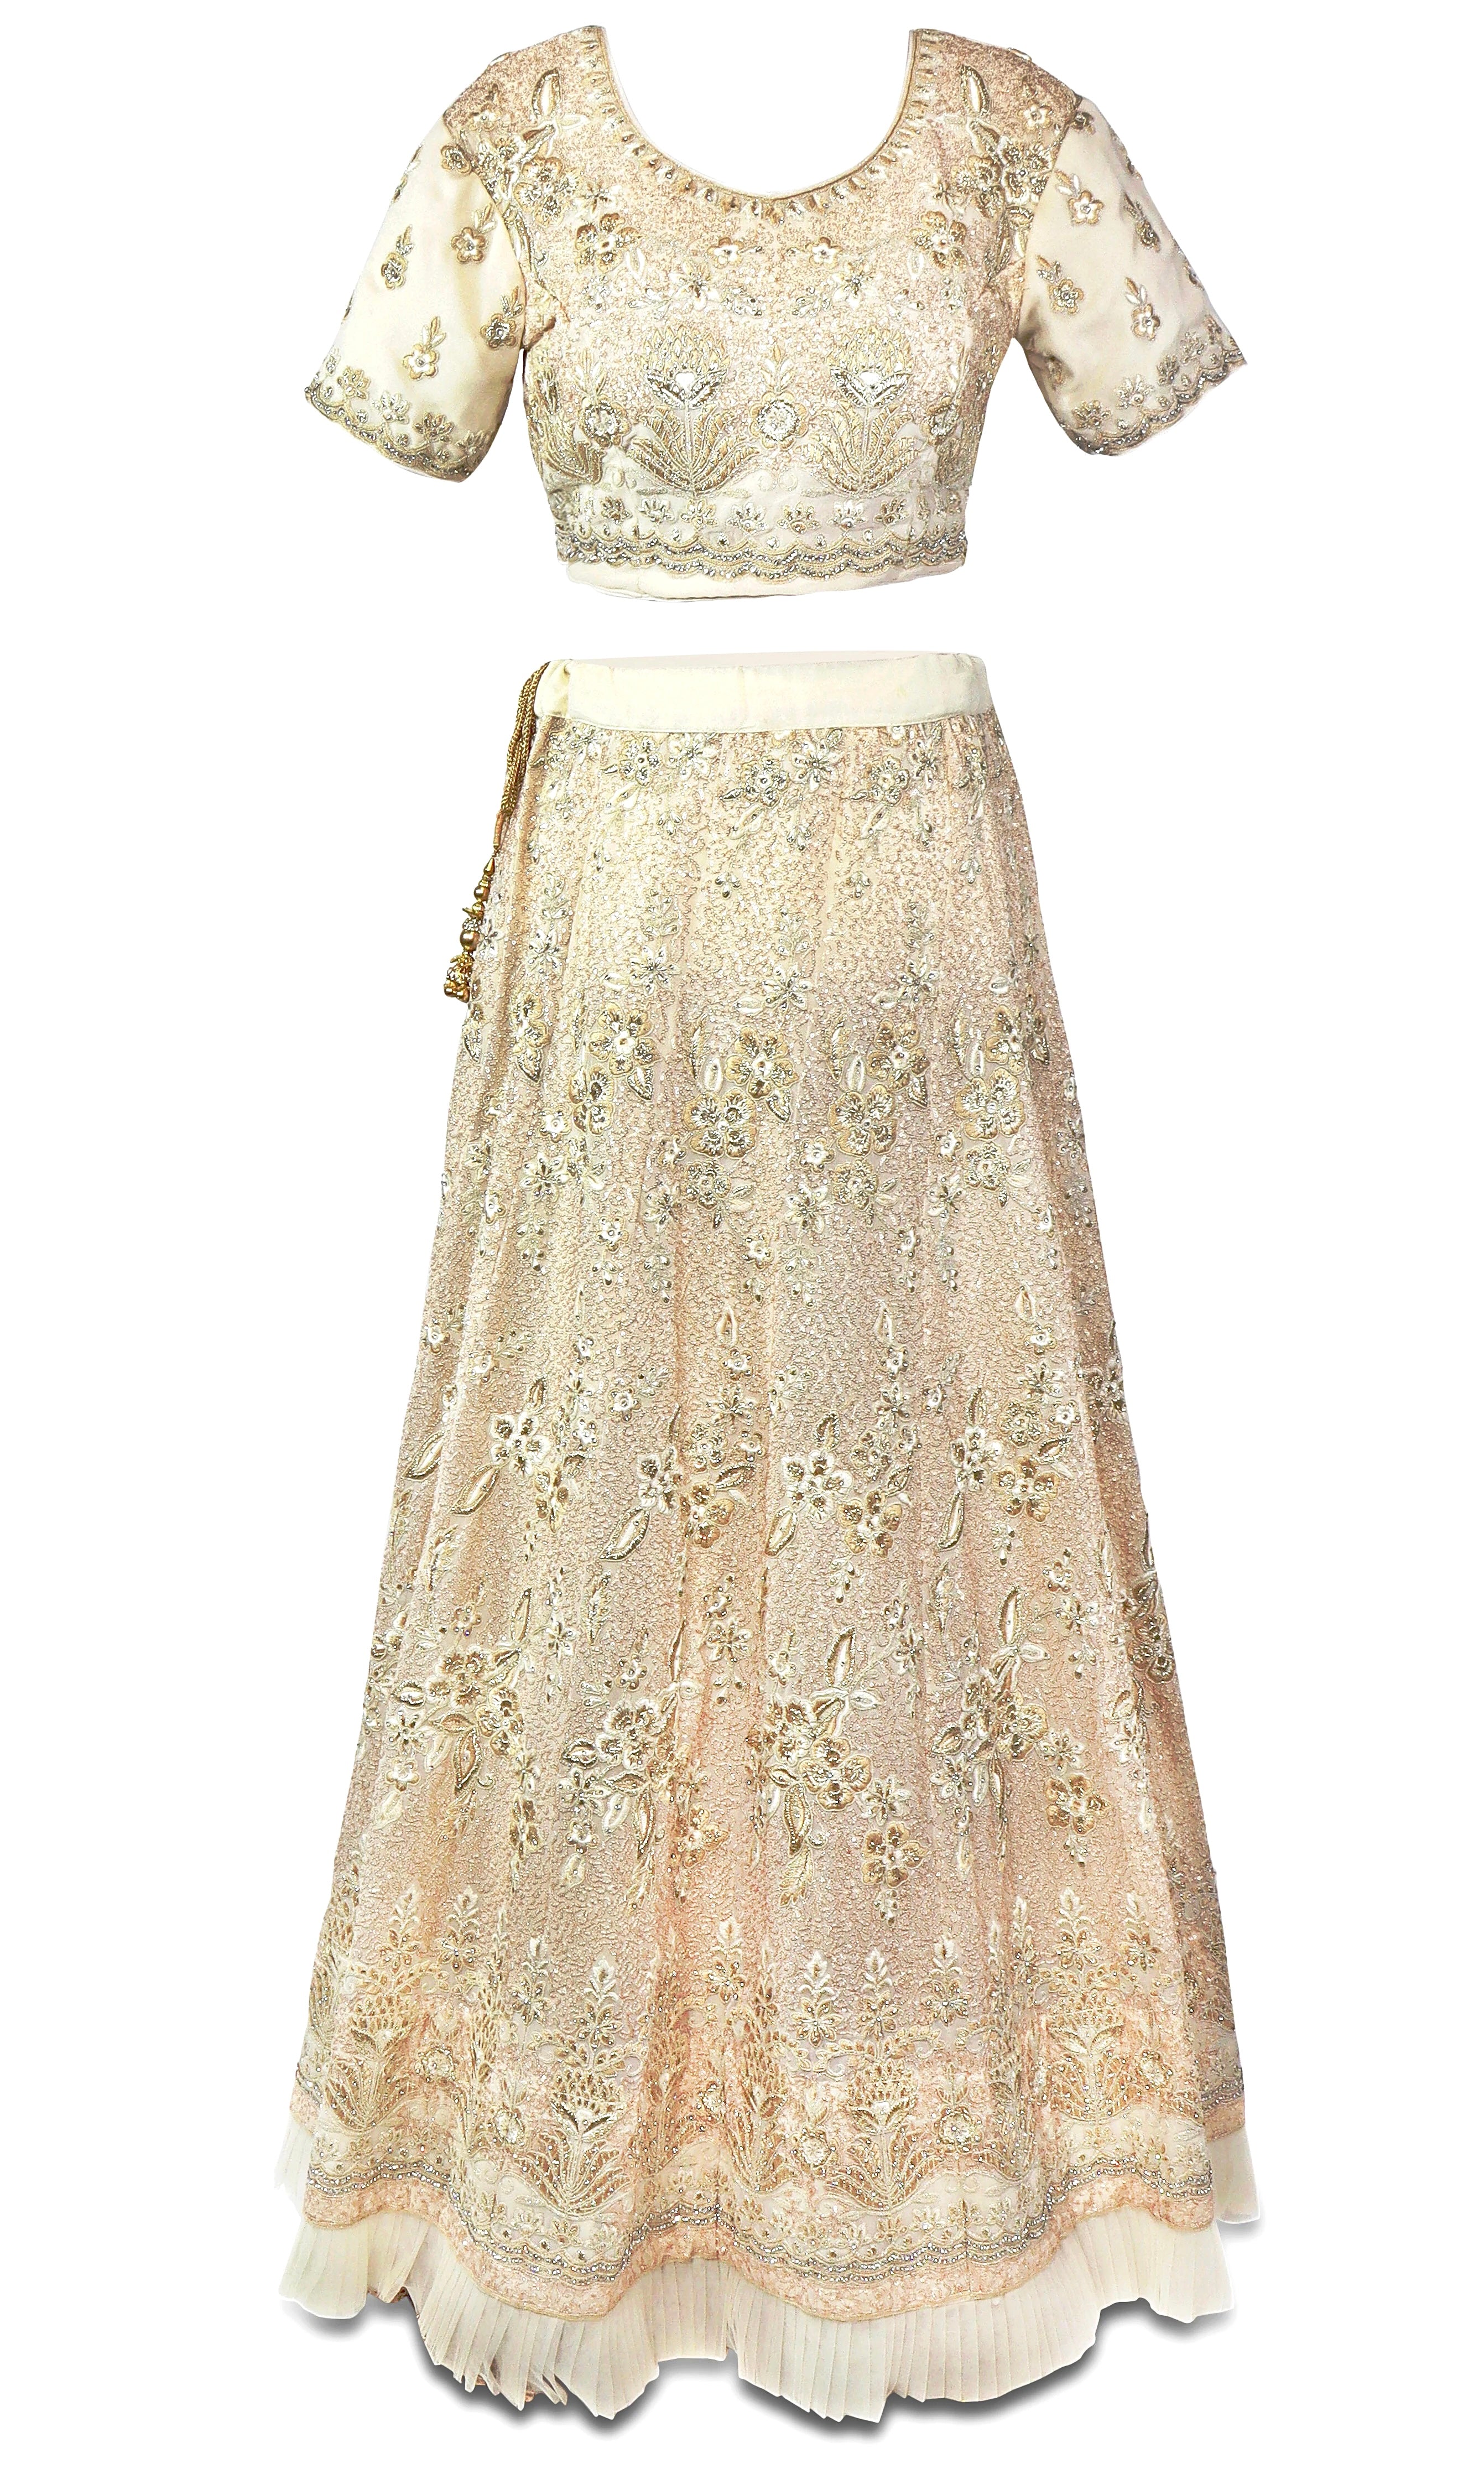 3 piece Creme shimmering colored lehenga is covered in beautiful embroidery in shades of creme, off-white, gold and silver.